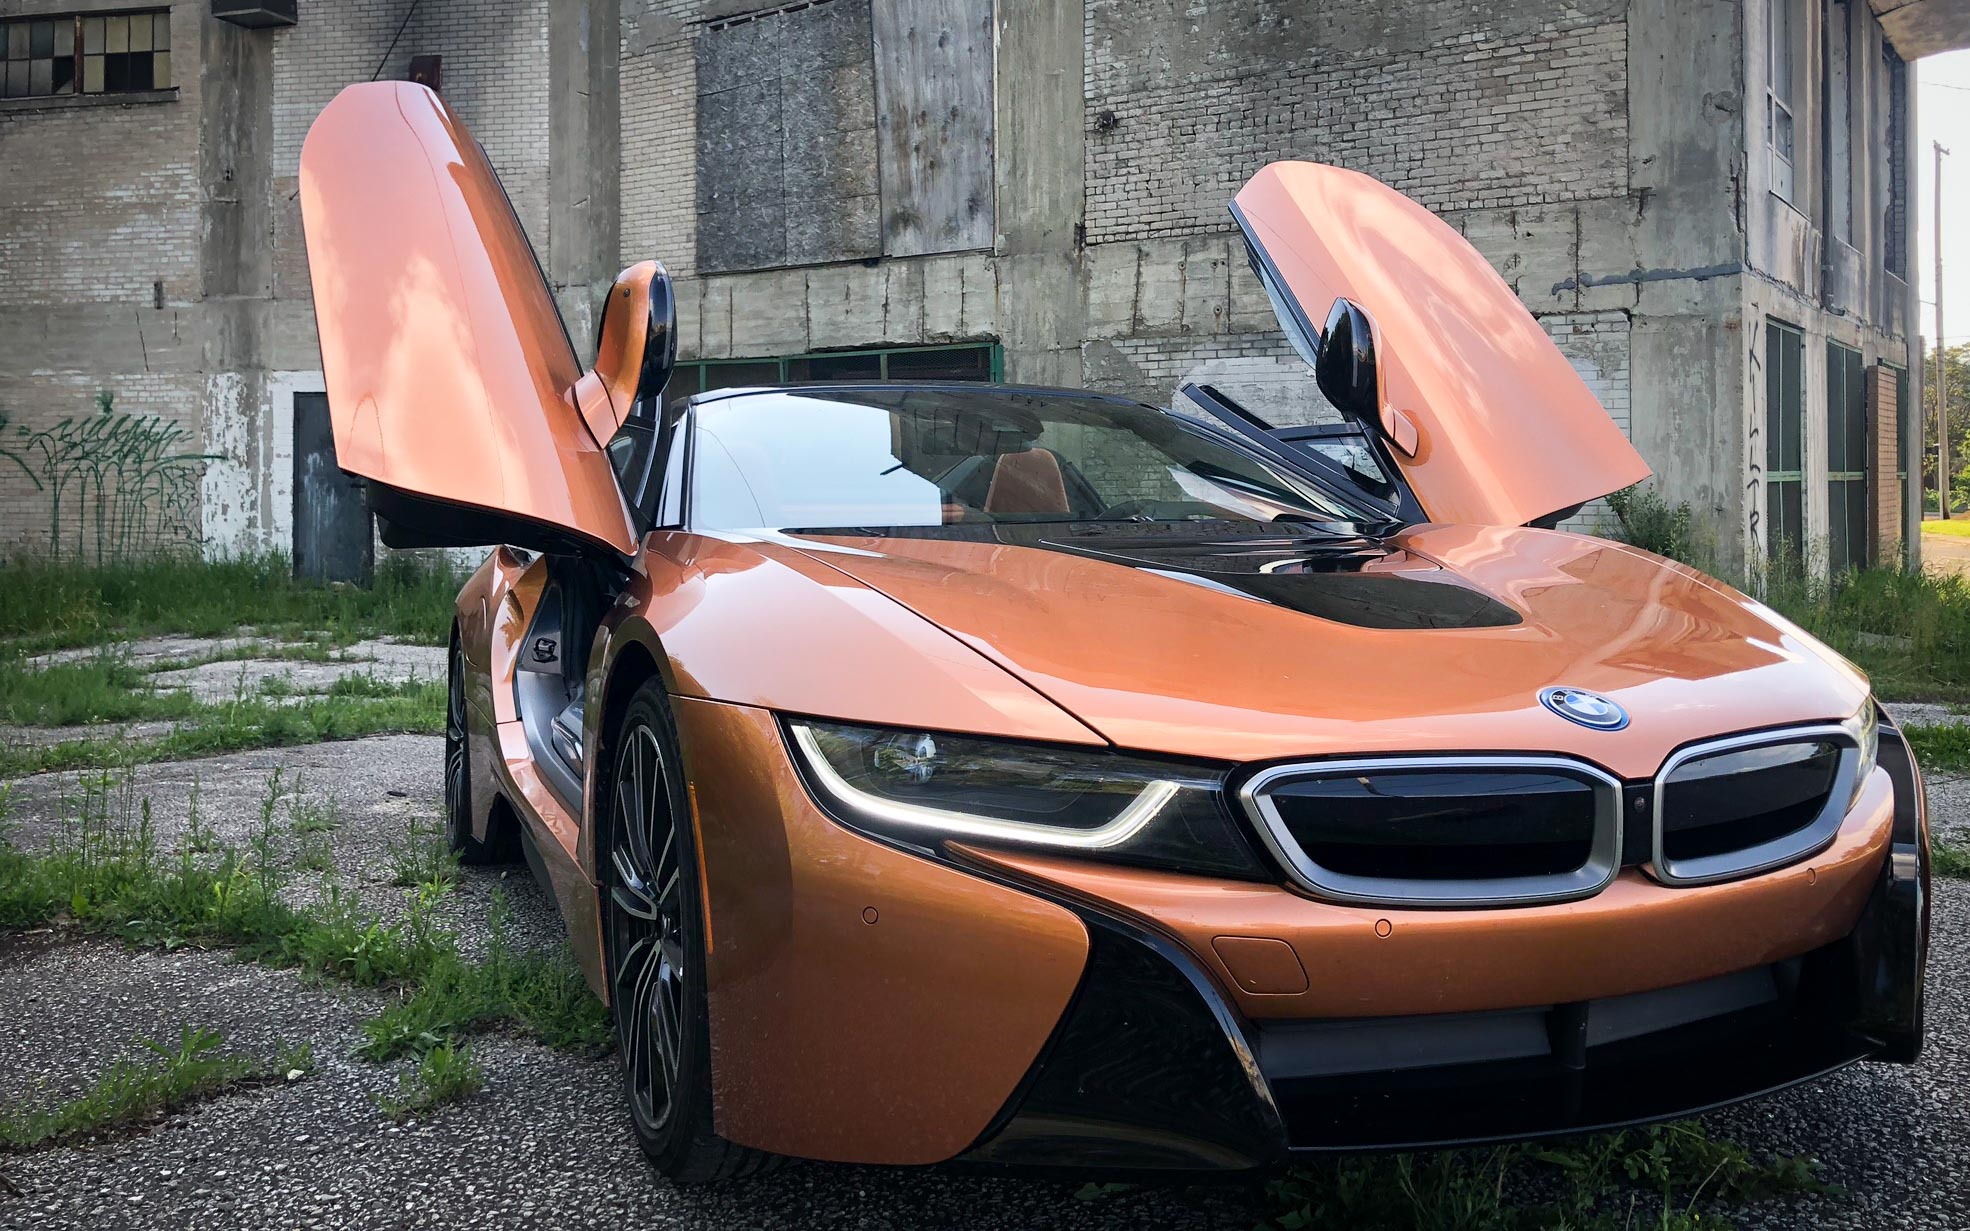 BMW 2019 i8 review: Driving yesterday’s car of tomorrow, today